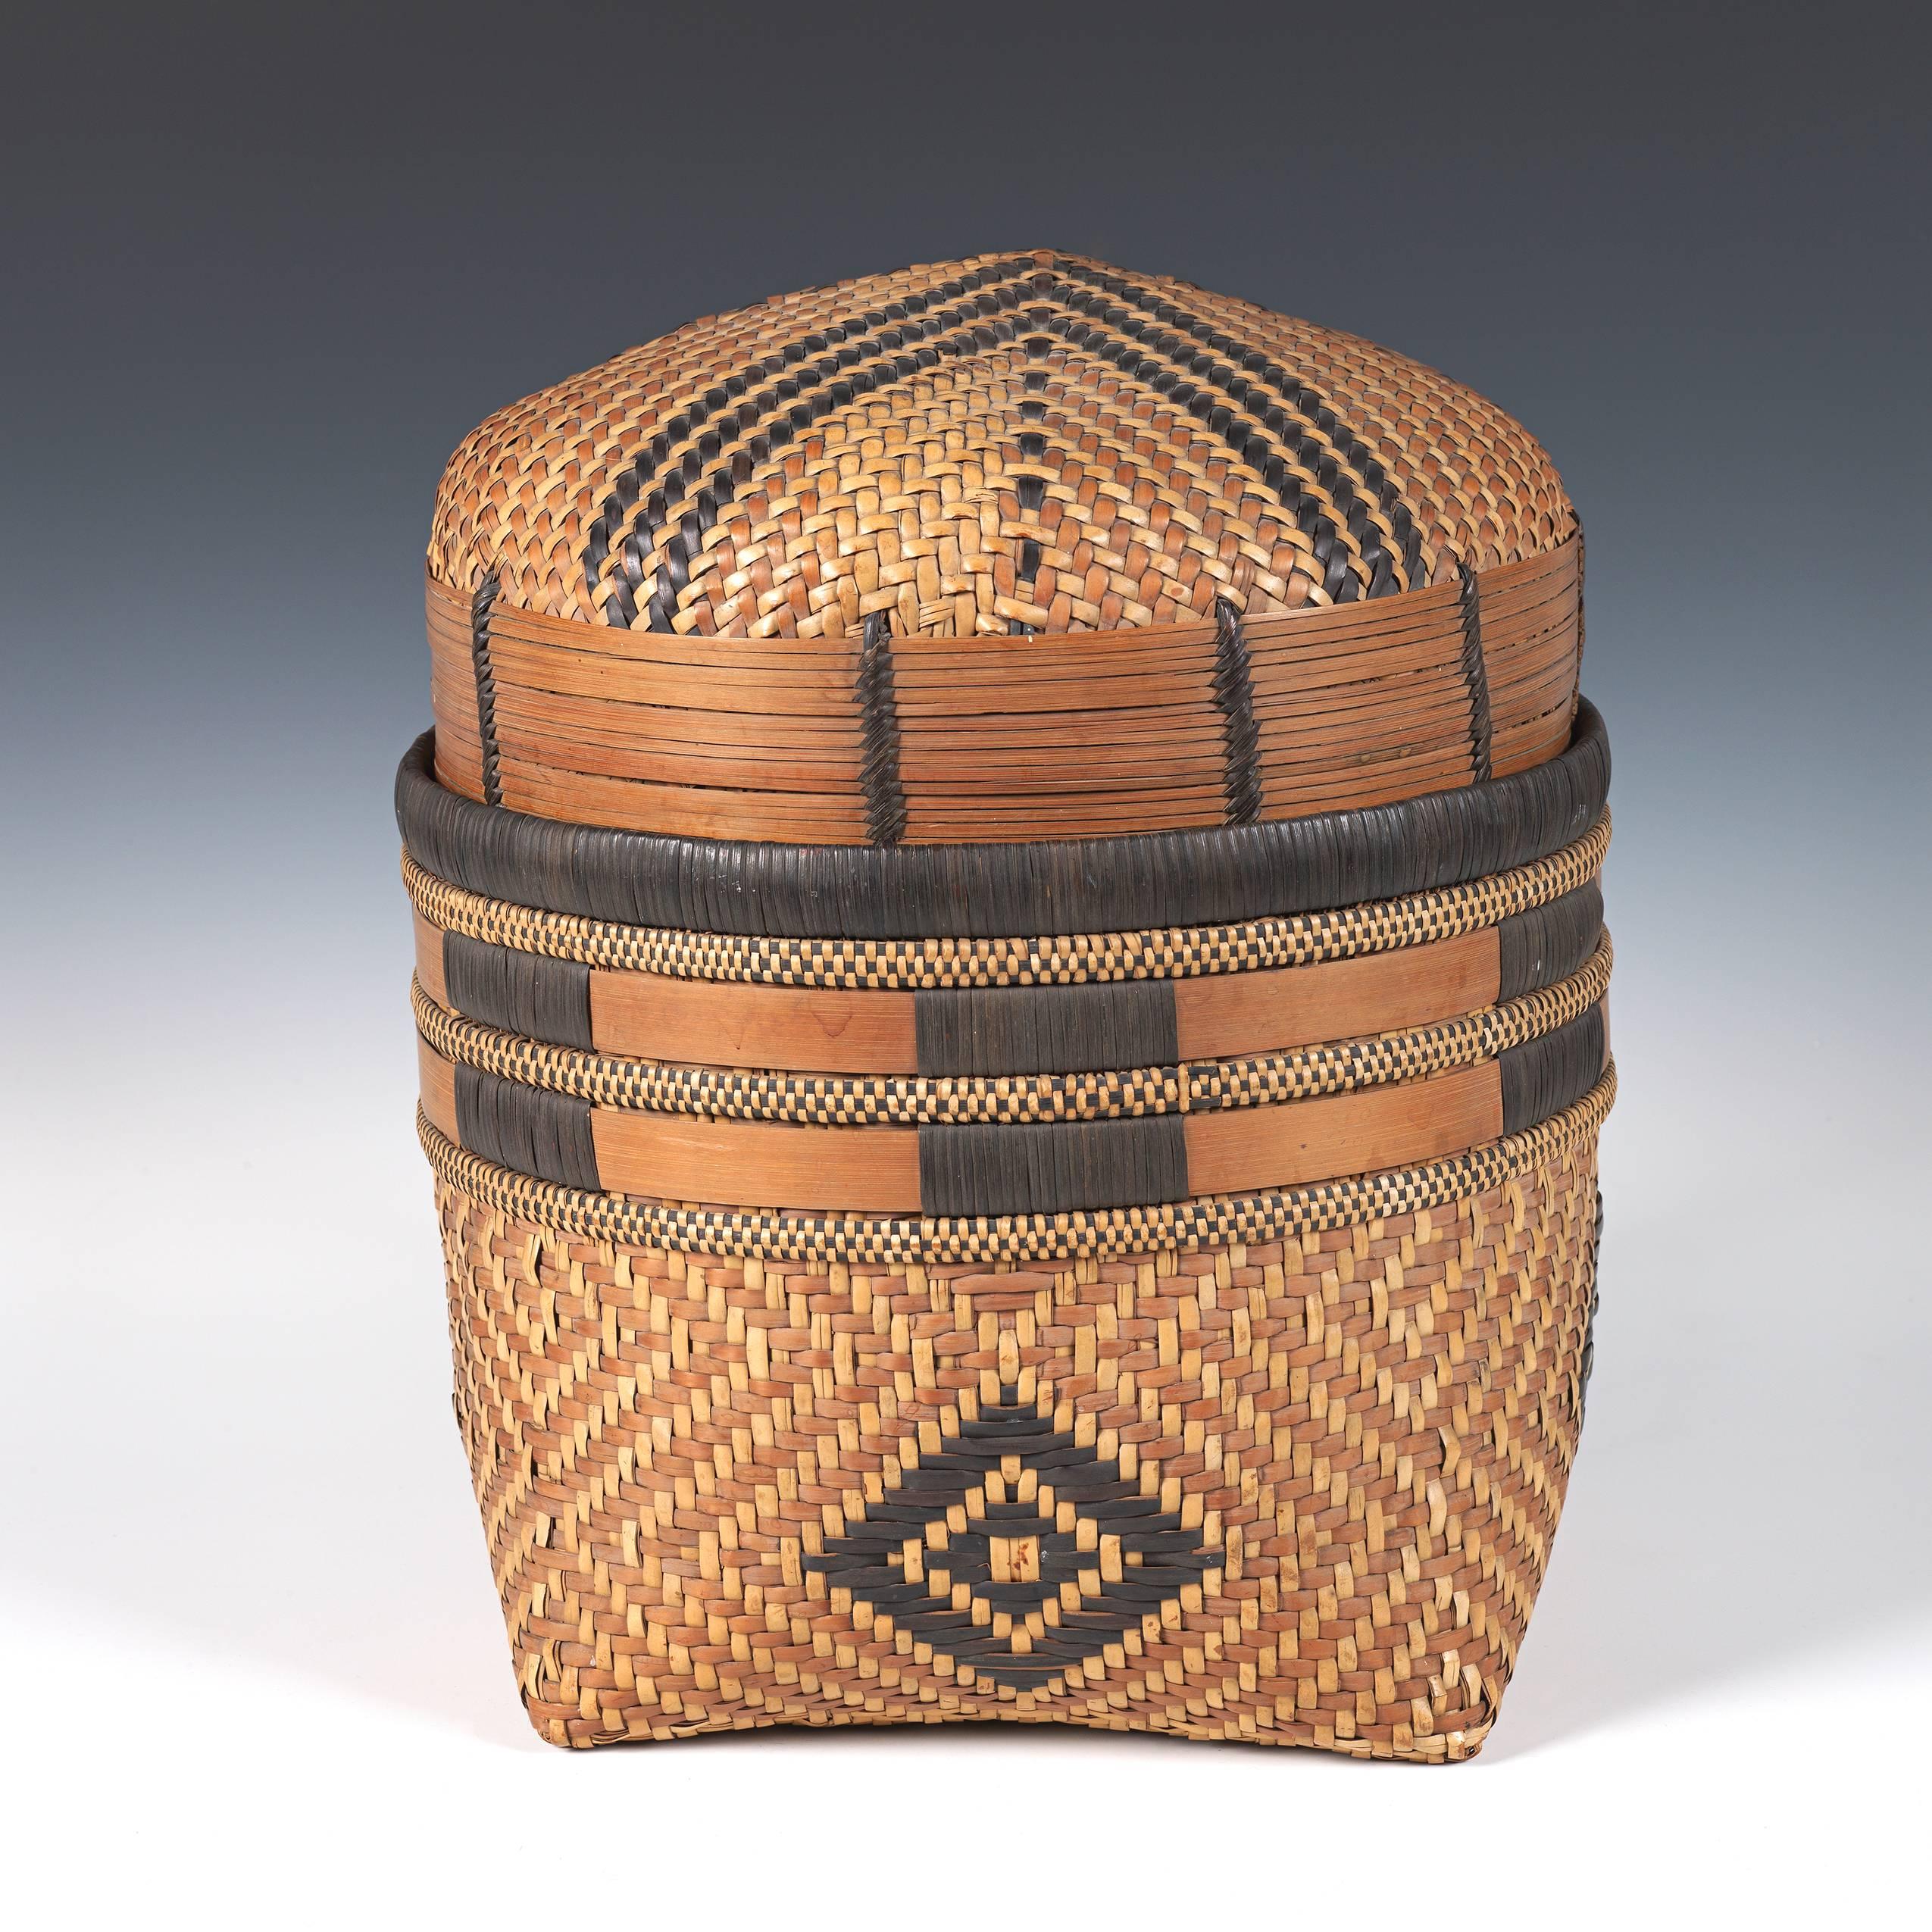 Large basket with geometric patterning.
Luba or Songye tribe in D. R. Congo.
From a Belgian colonial era collection.
This large storage basket woven in several different techniques is the finest we have ever seen either in private or in museum